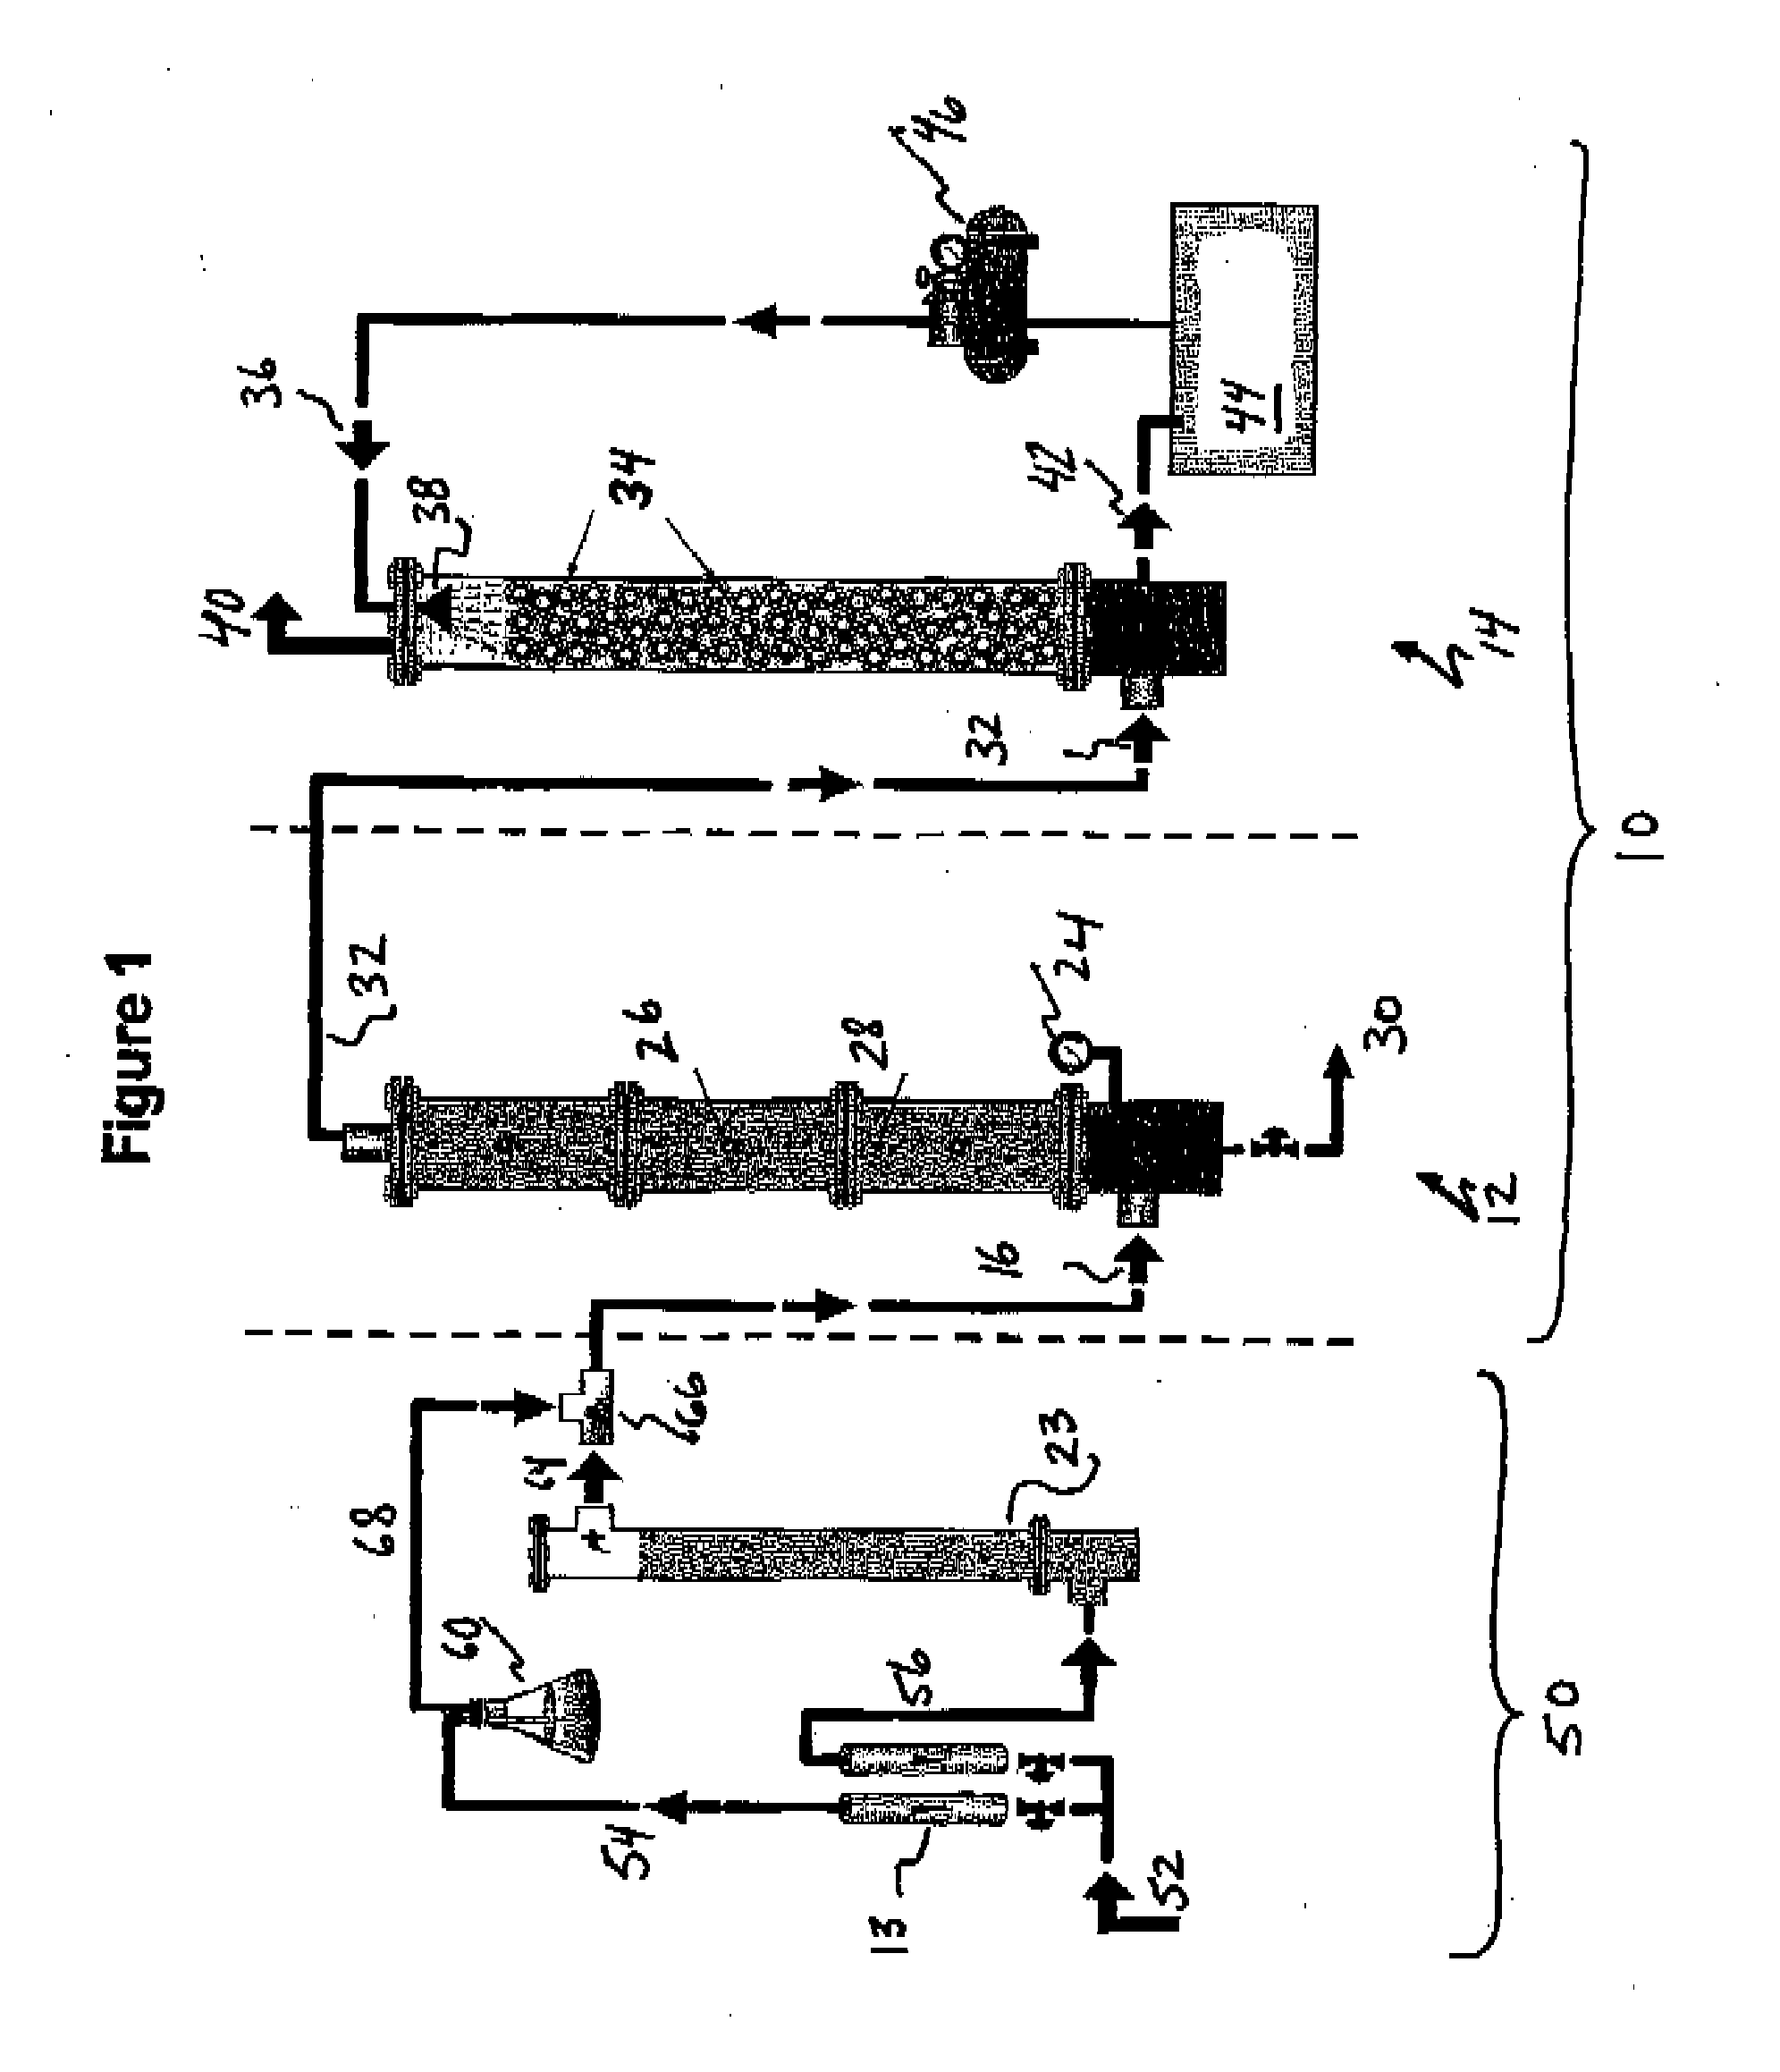 Gas purification apparatus and process using biofiltration and enzymatic reactions